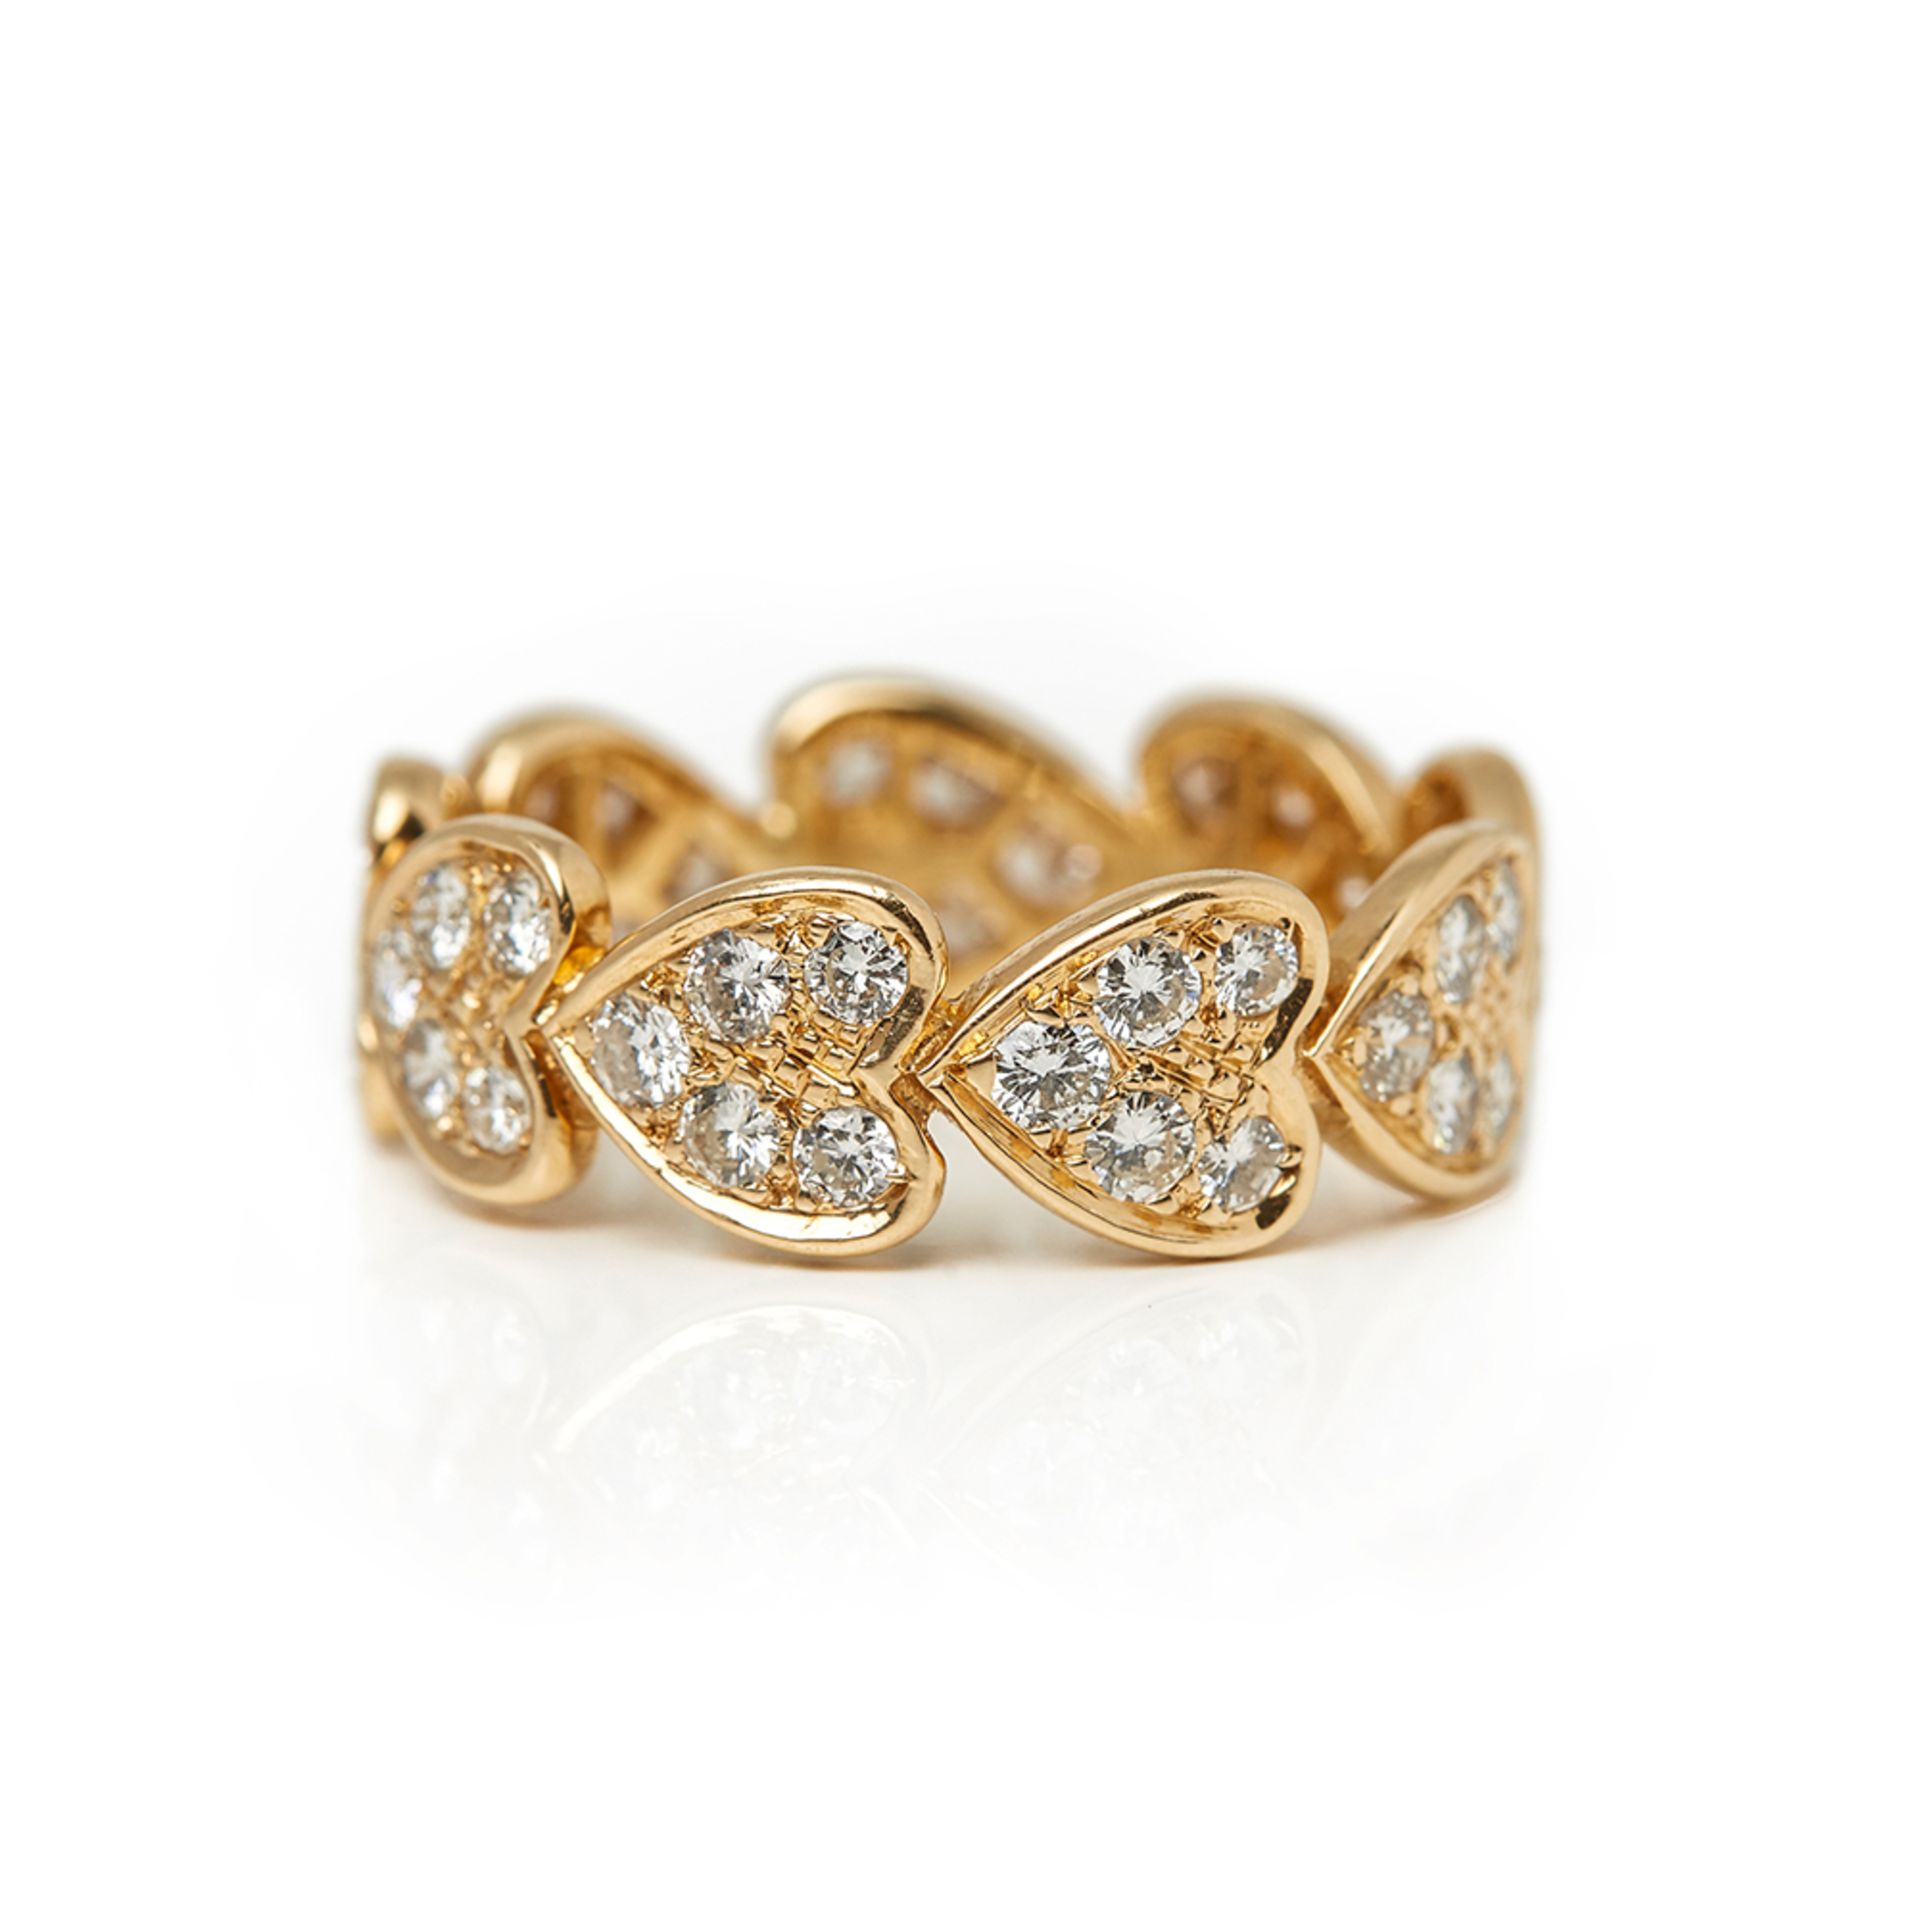 Cartier 18k Yellow Gold Diamond Heart Ring - Image 4 of 23